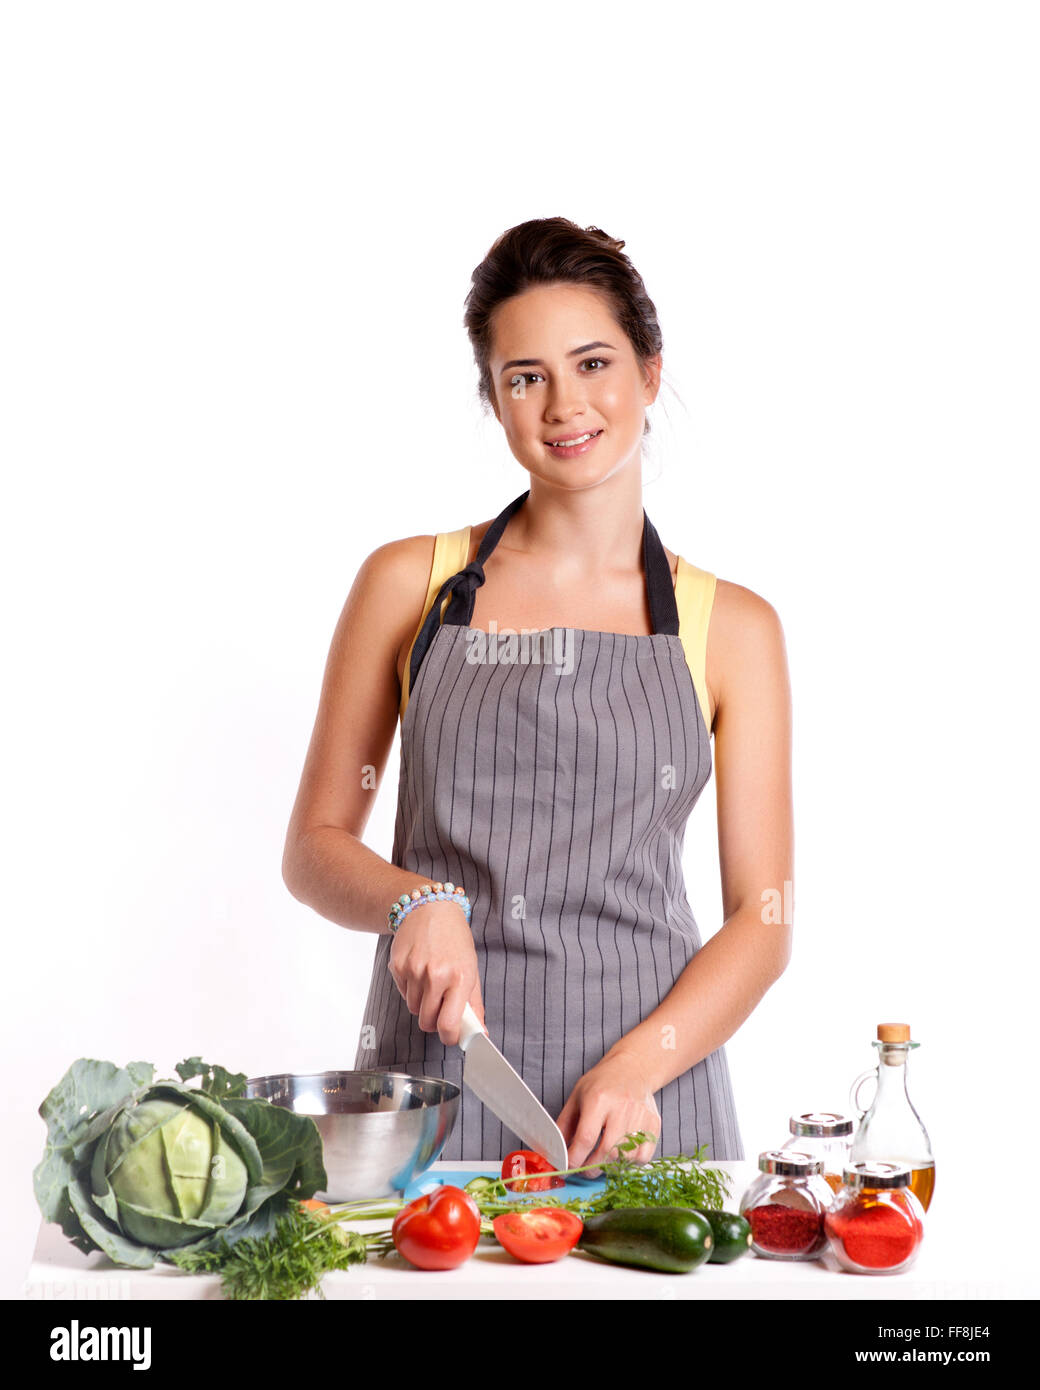 Young Woman Cooking. Healthy Food - Vegetable Salad. Diet. Dieting Concept. Healthy Lifestyle. Cooking At Home. Stock Photo